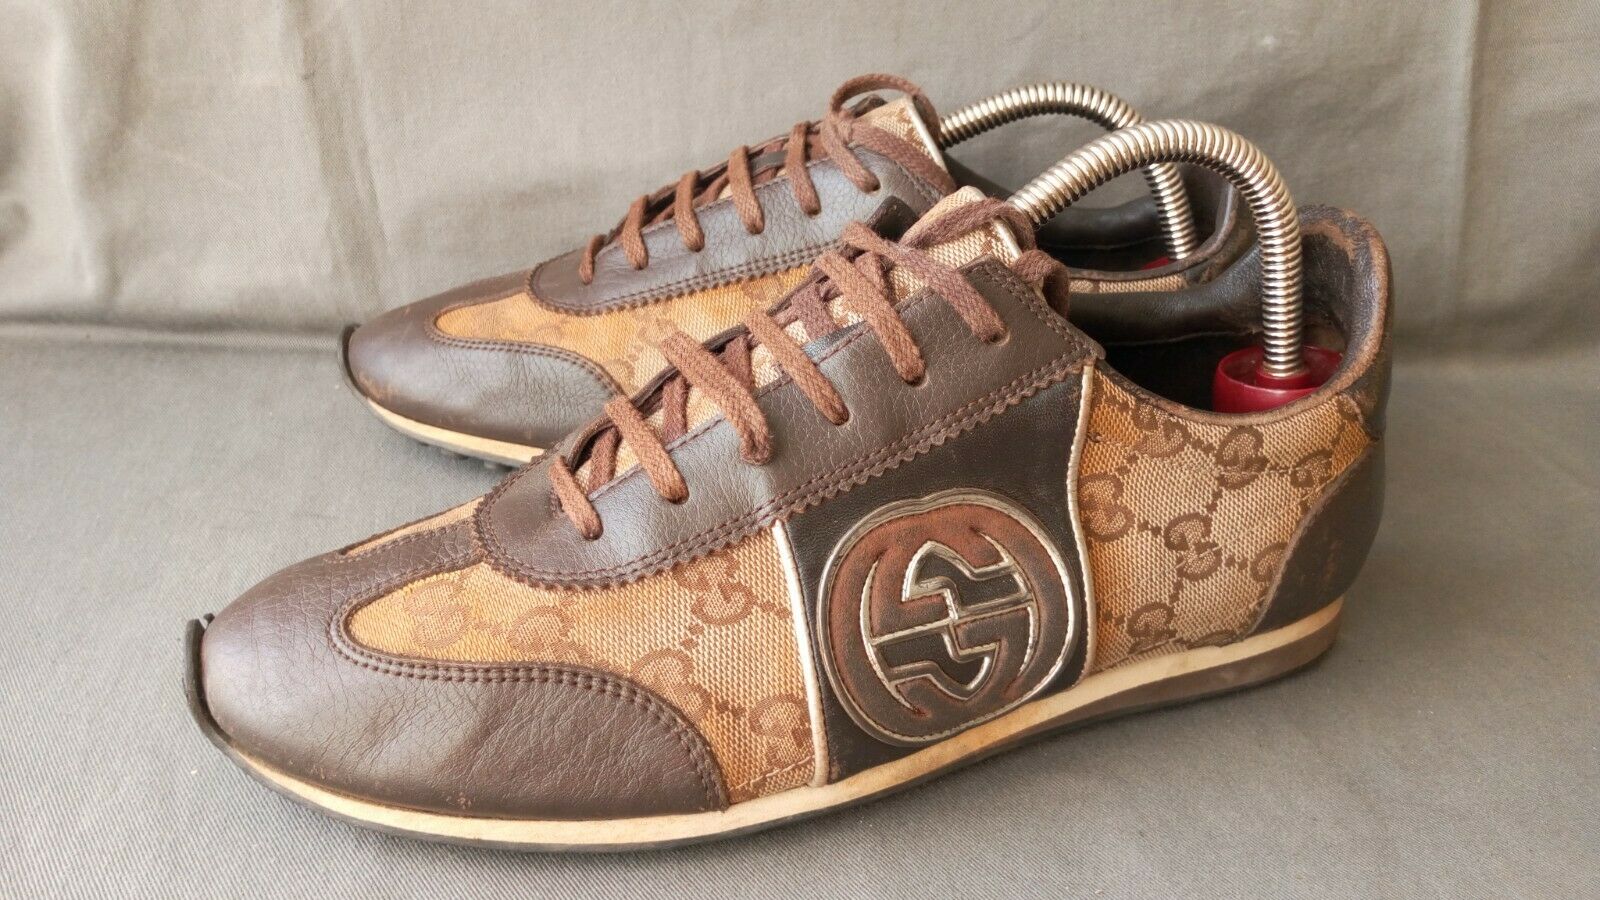 GUCCI 202744 Brown Leather/Canvas Lo Top Sneaker Shoes Sz-5G 6US Made in Italy